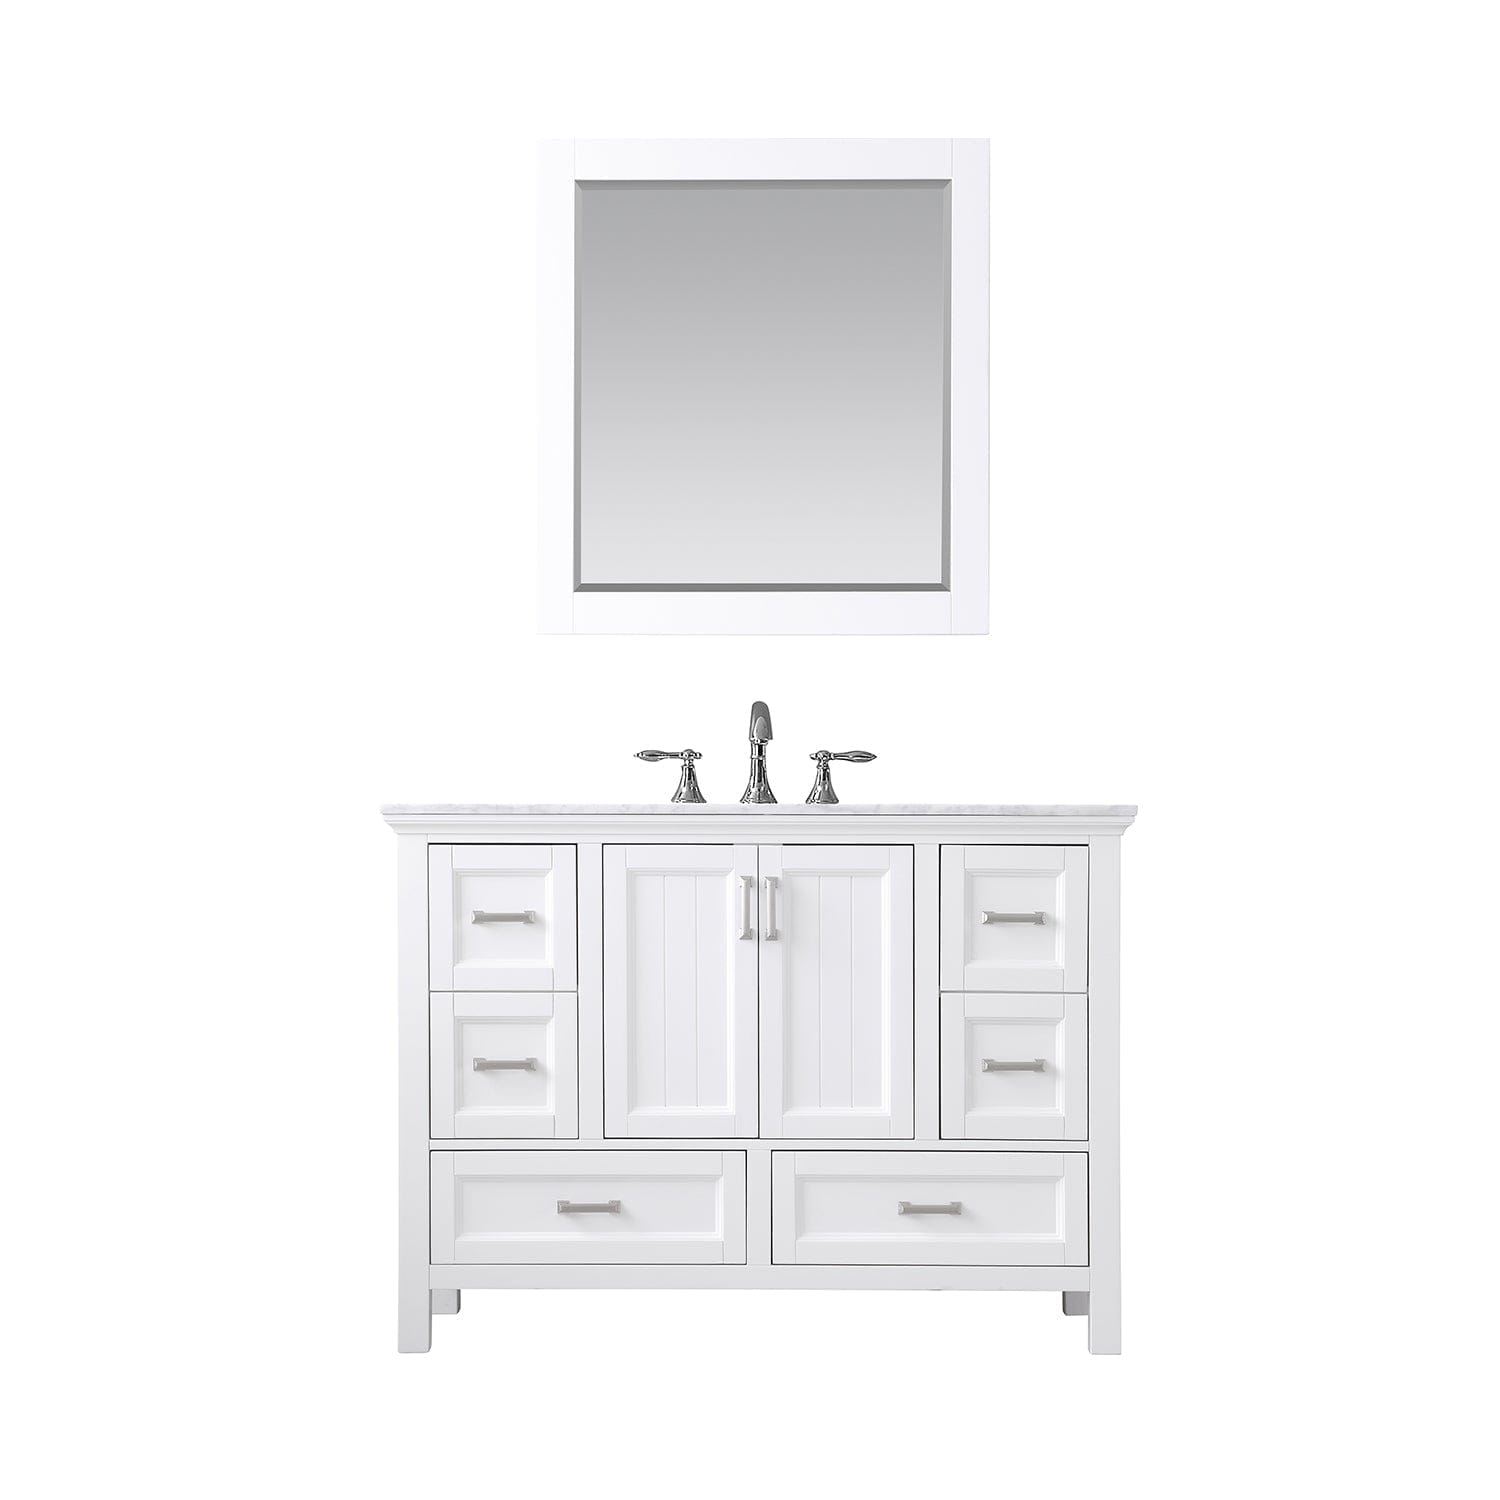 Altair Isla 48" Single Bathroom Vanity Set in White and Carrara White Marble Countertop with Mirror 538048-WH-CA - Molaix631112970877Vanity538048-WH-CA